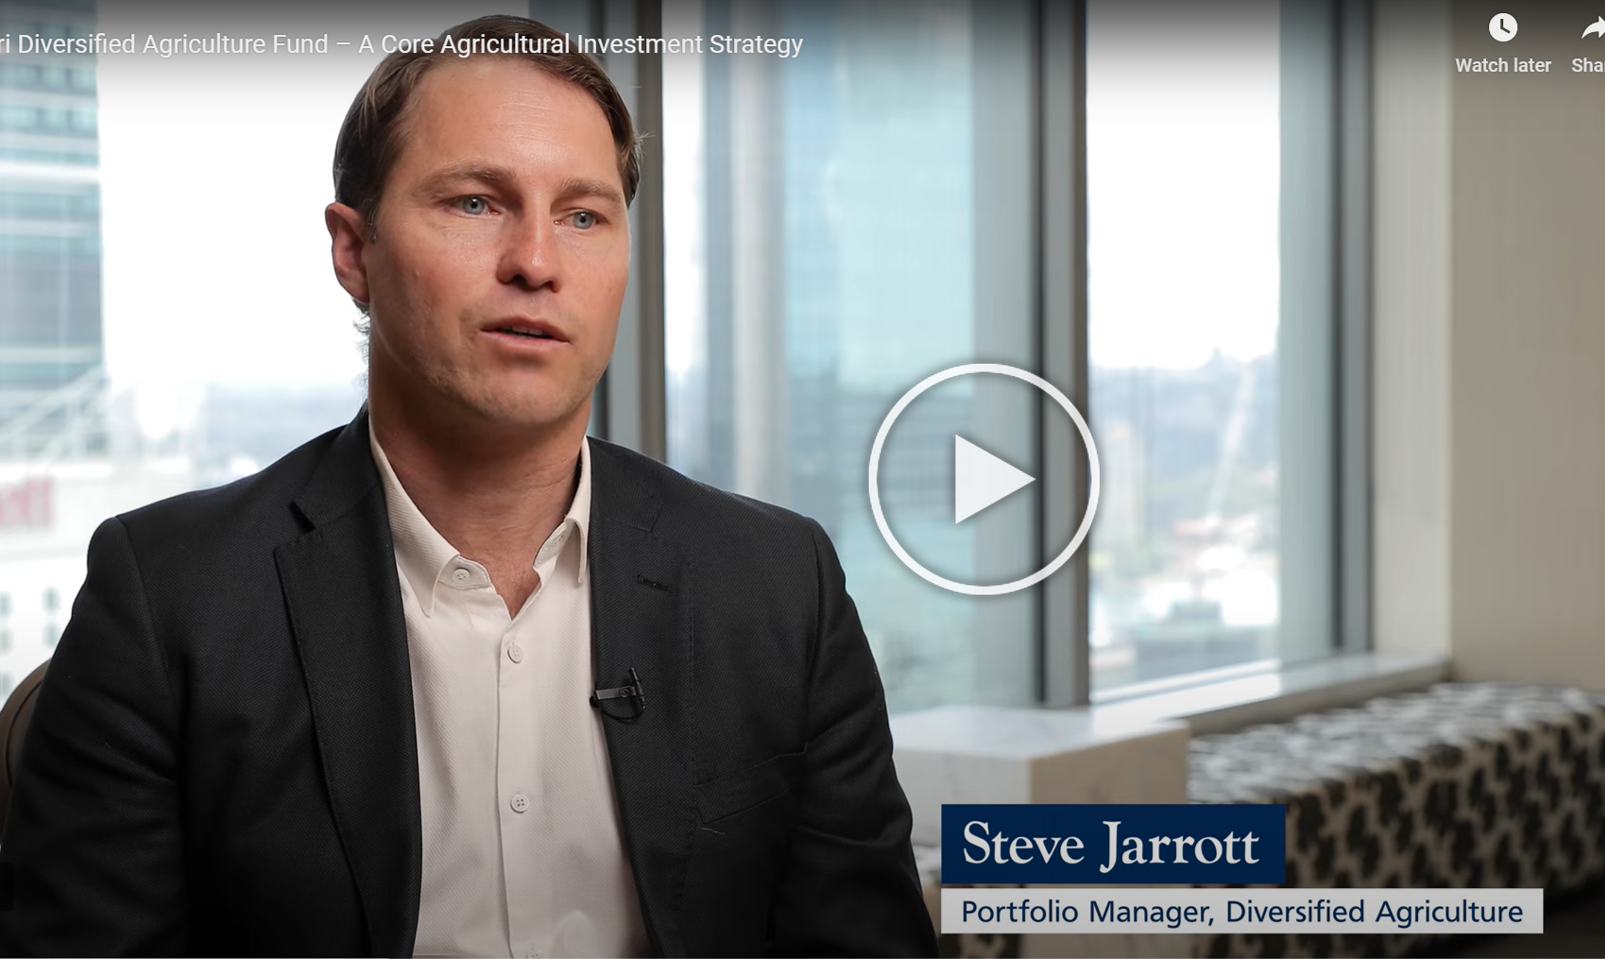 Steve Jarrot, Portfolio Manager Diversified Agriculture records a video